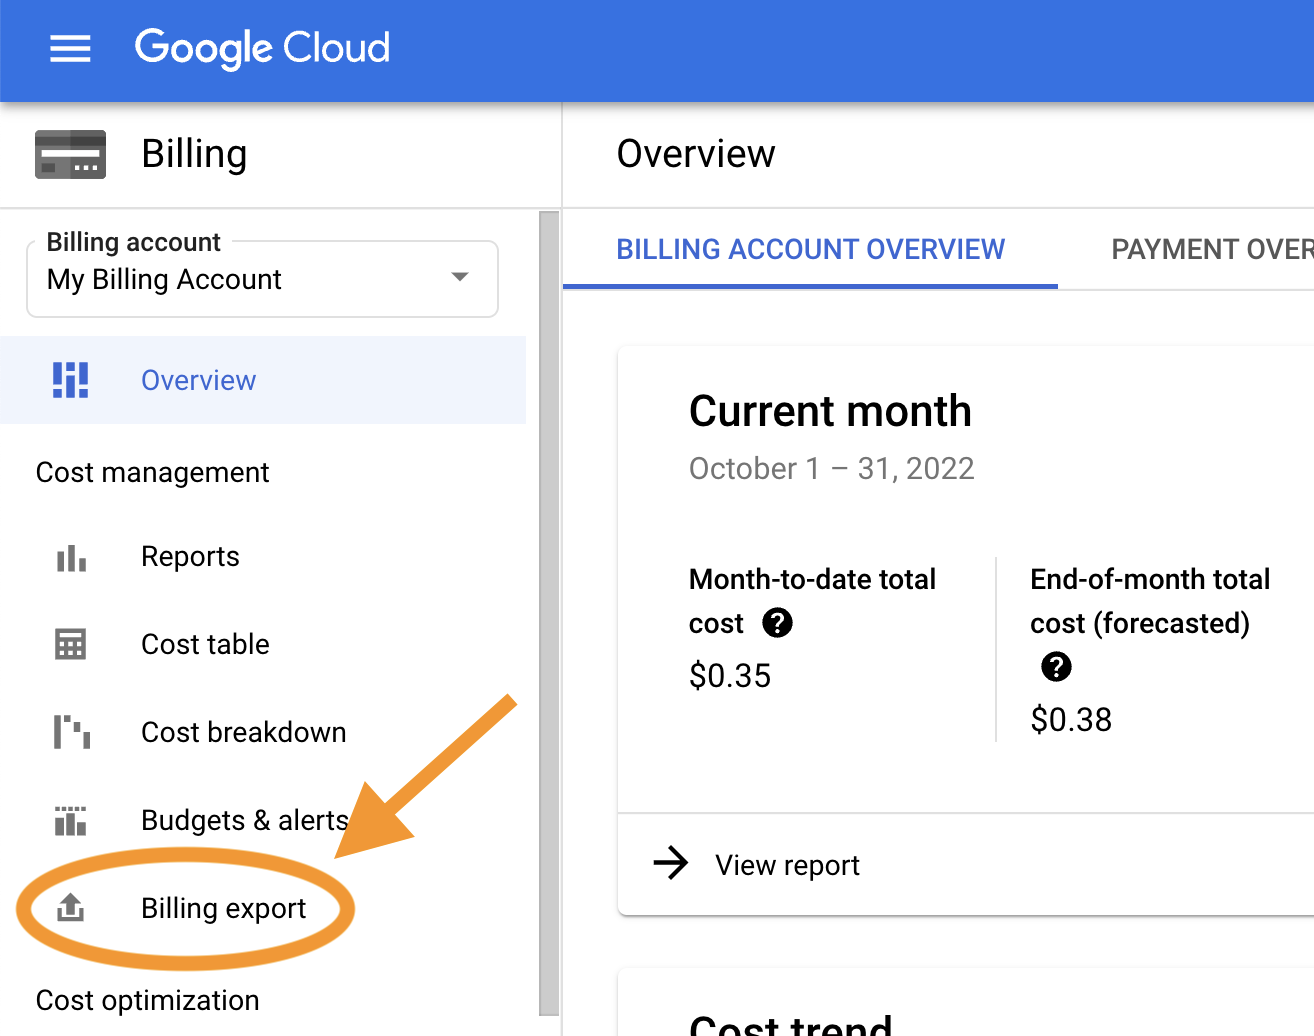 Screenshot of the Billing account overview page with a circle around the Billing exprt icon on the left column under the cost management section and the current month's summary spending of $0.35 month-to-date total and $0.35 end-of-month-total forecasted in the center